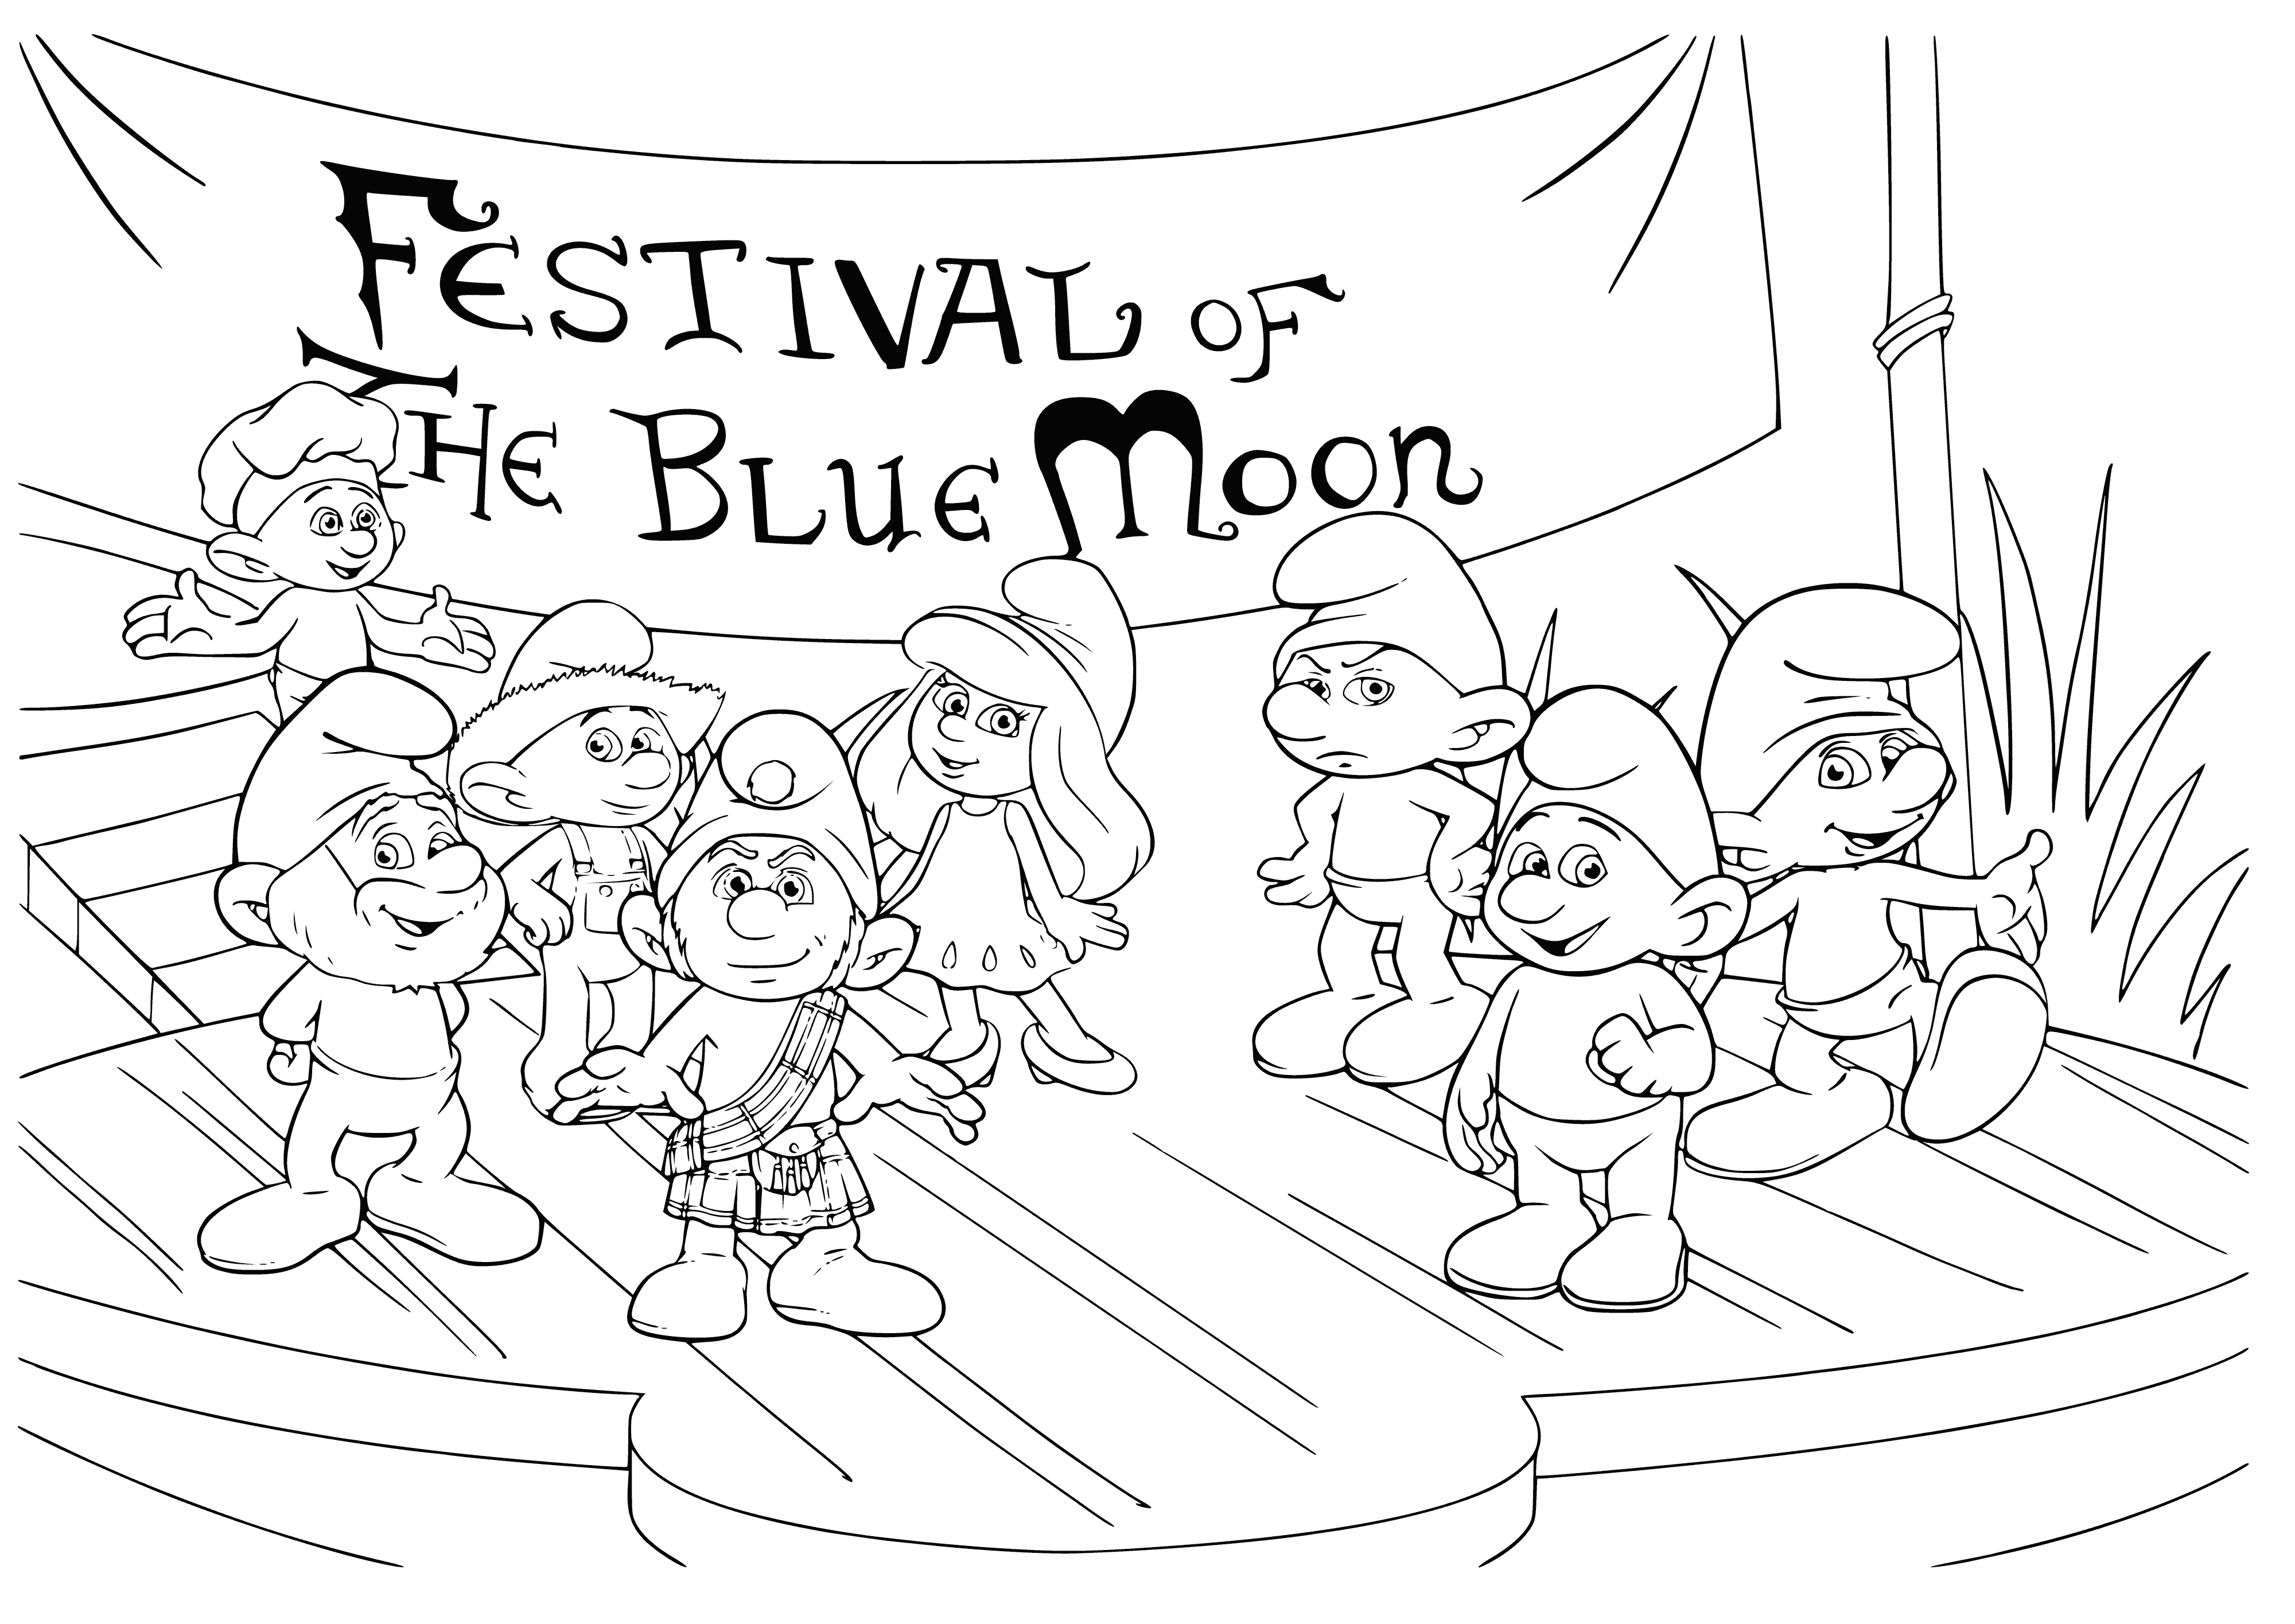 Blue Moon Festival coloring page